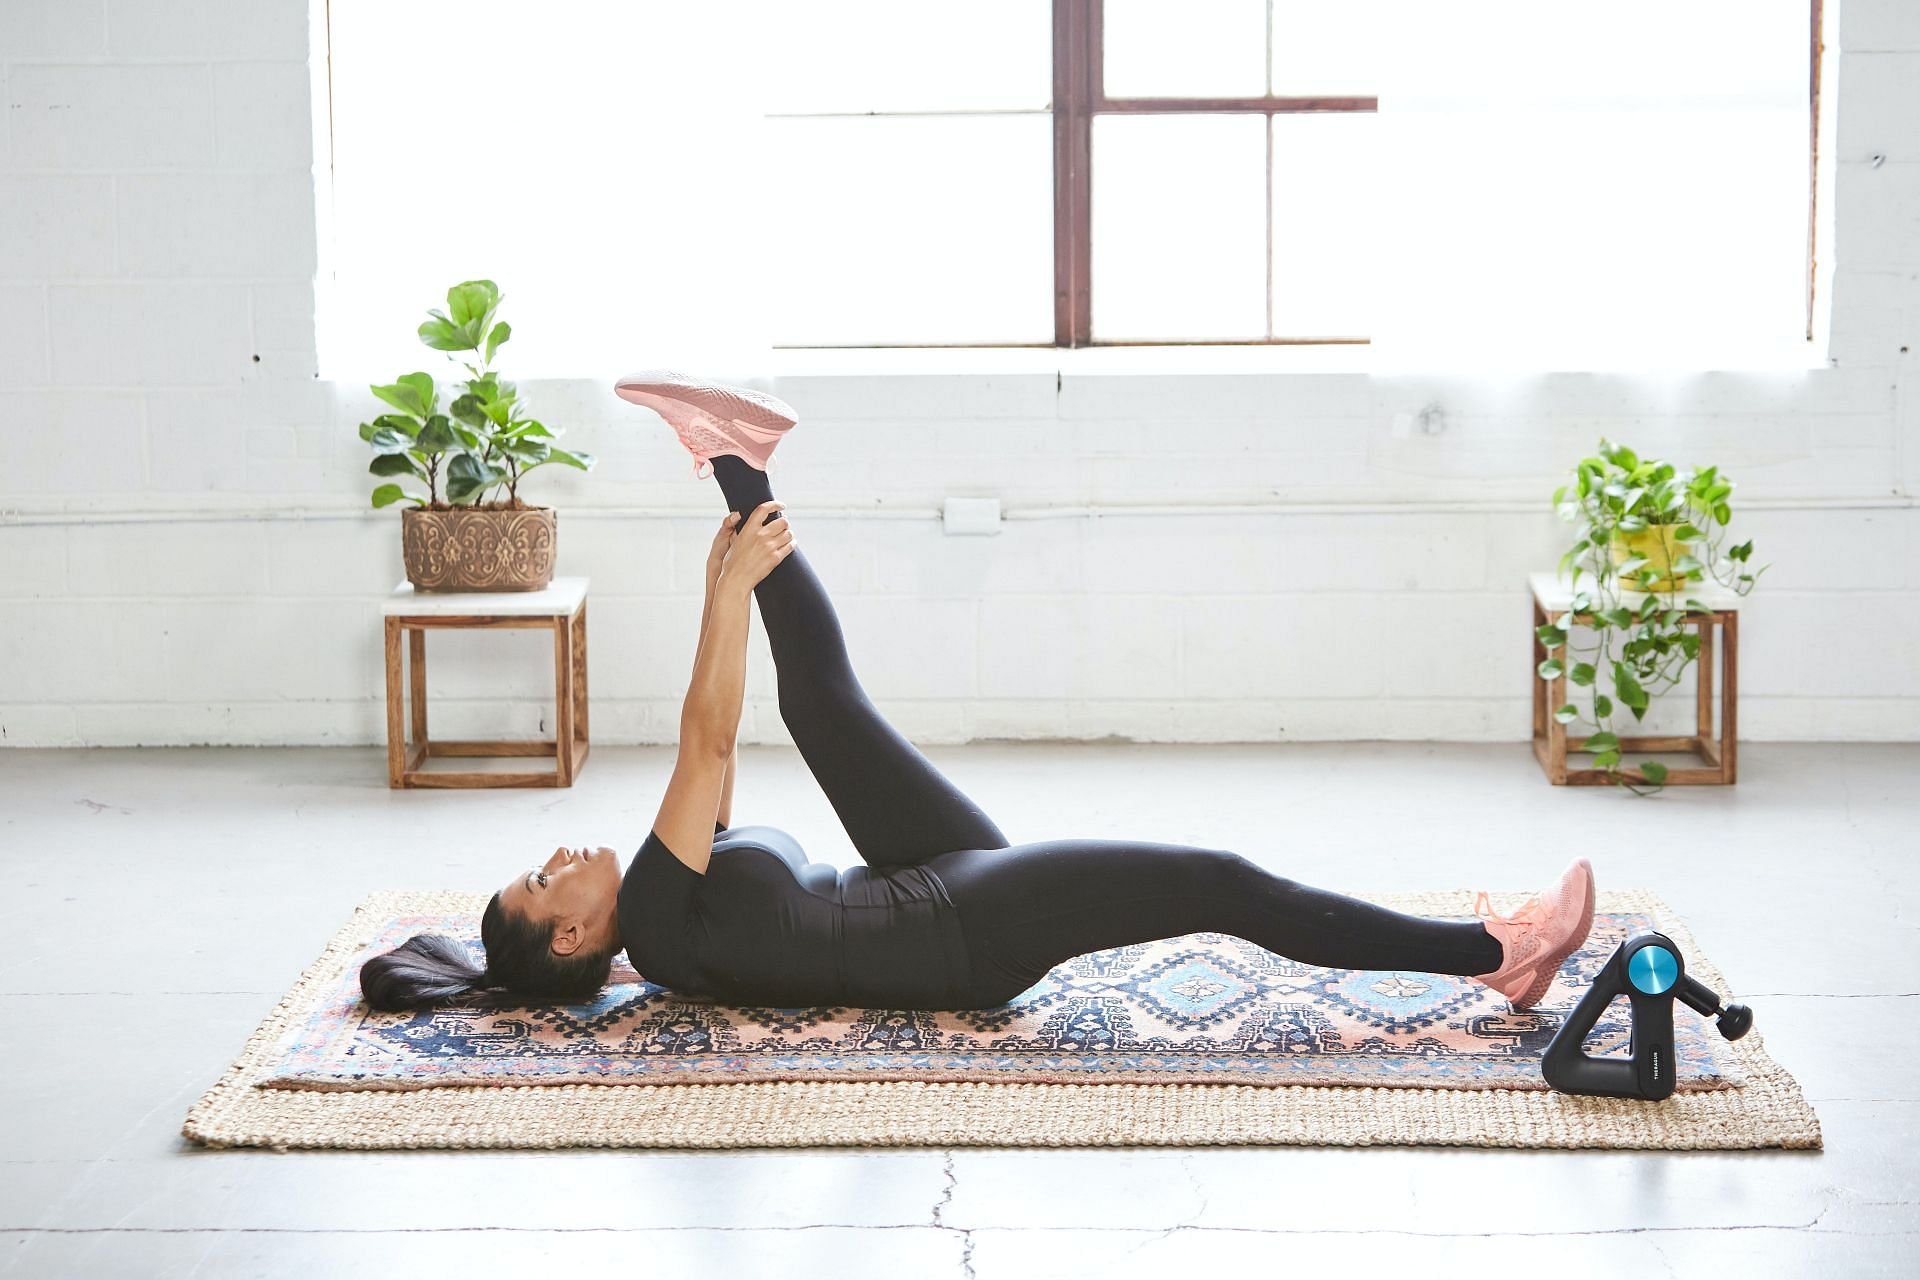 Women can try exercises in the comfort of their home to stay fit. (Image via Unsplash/LittPro Inc)